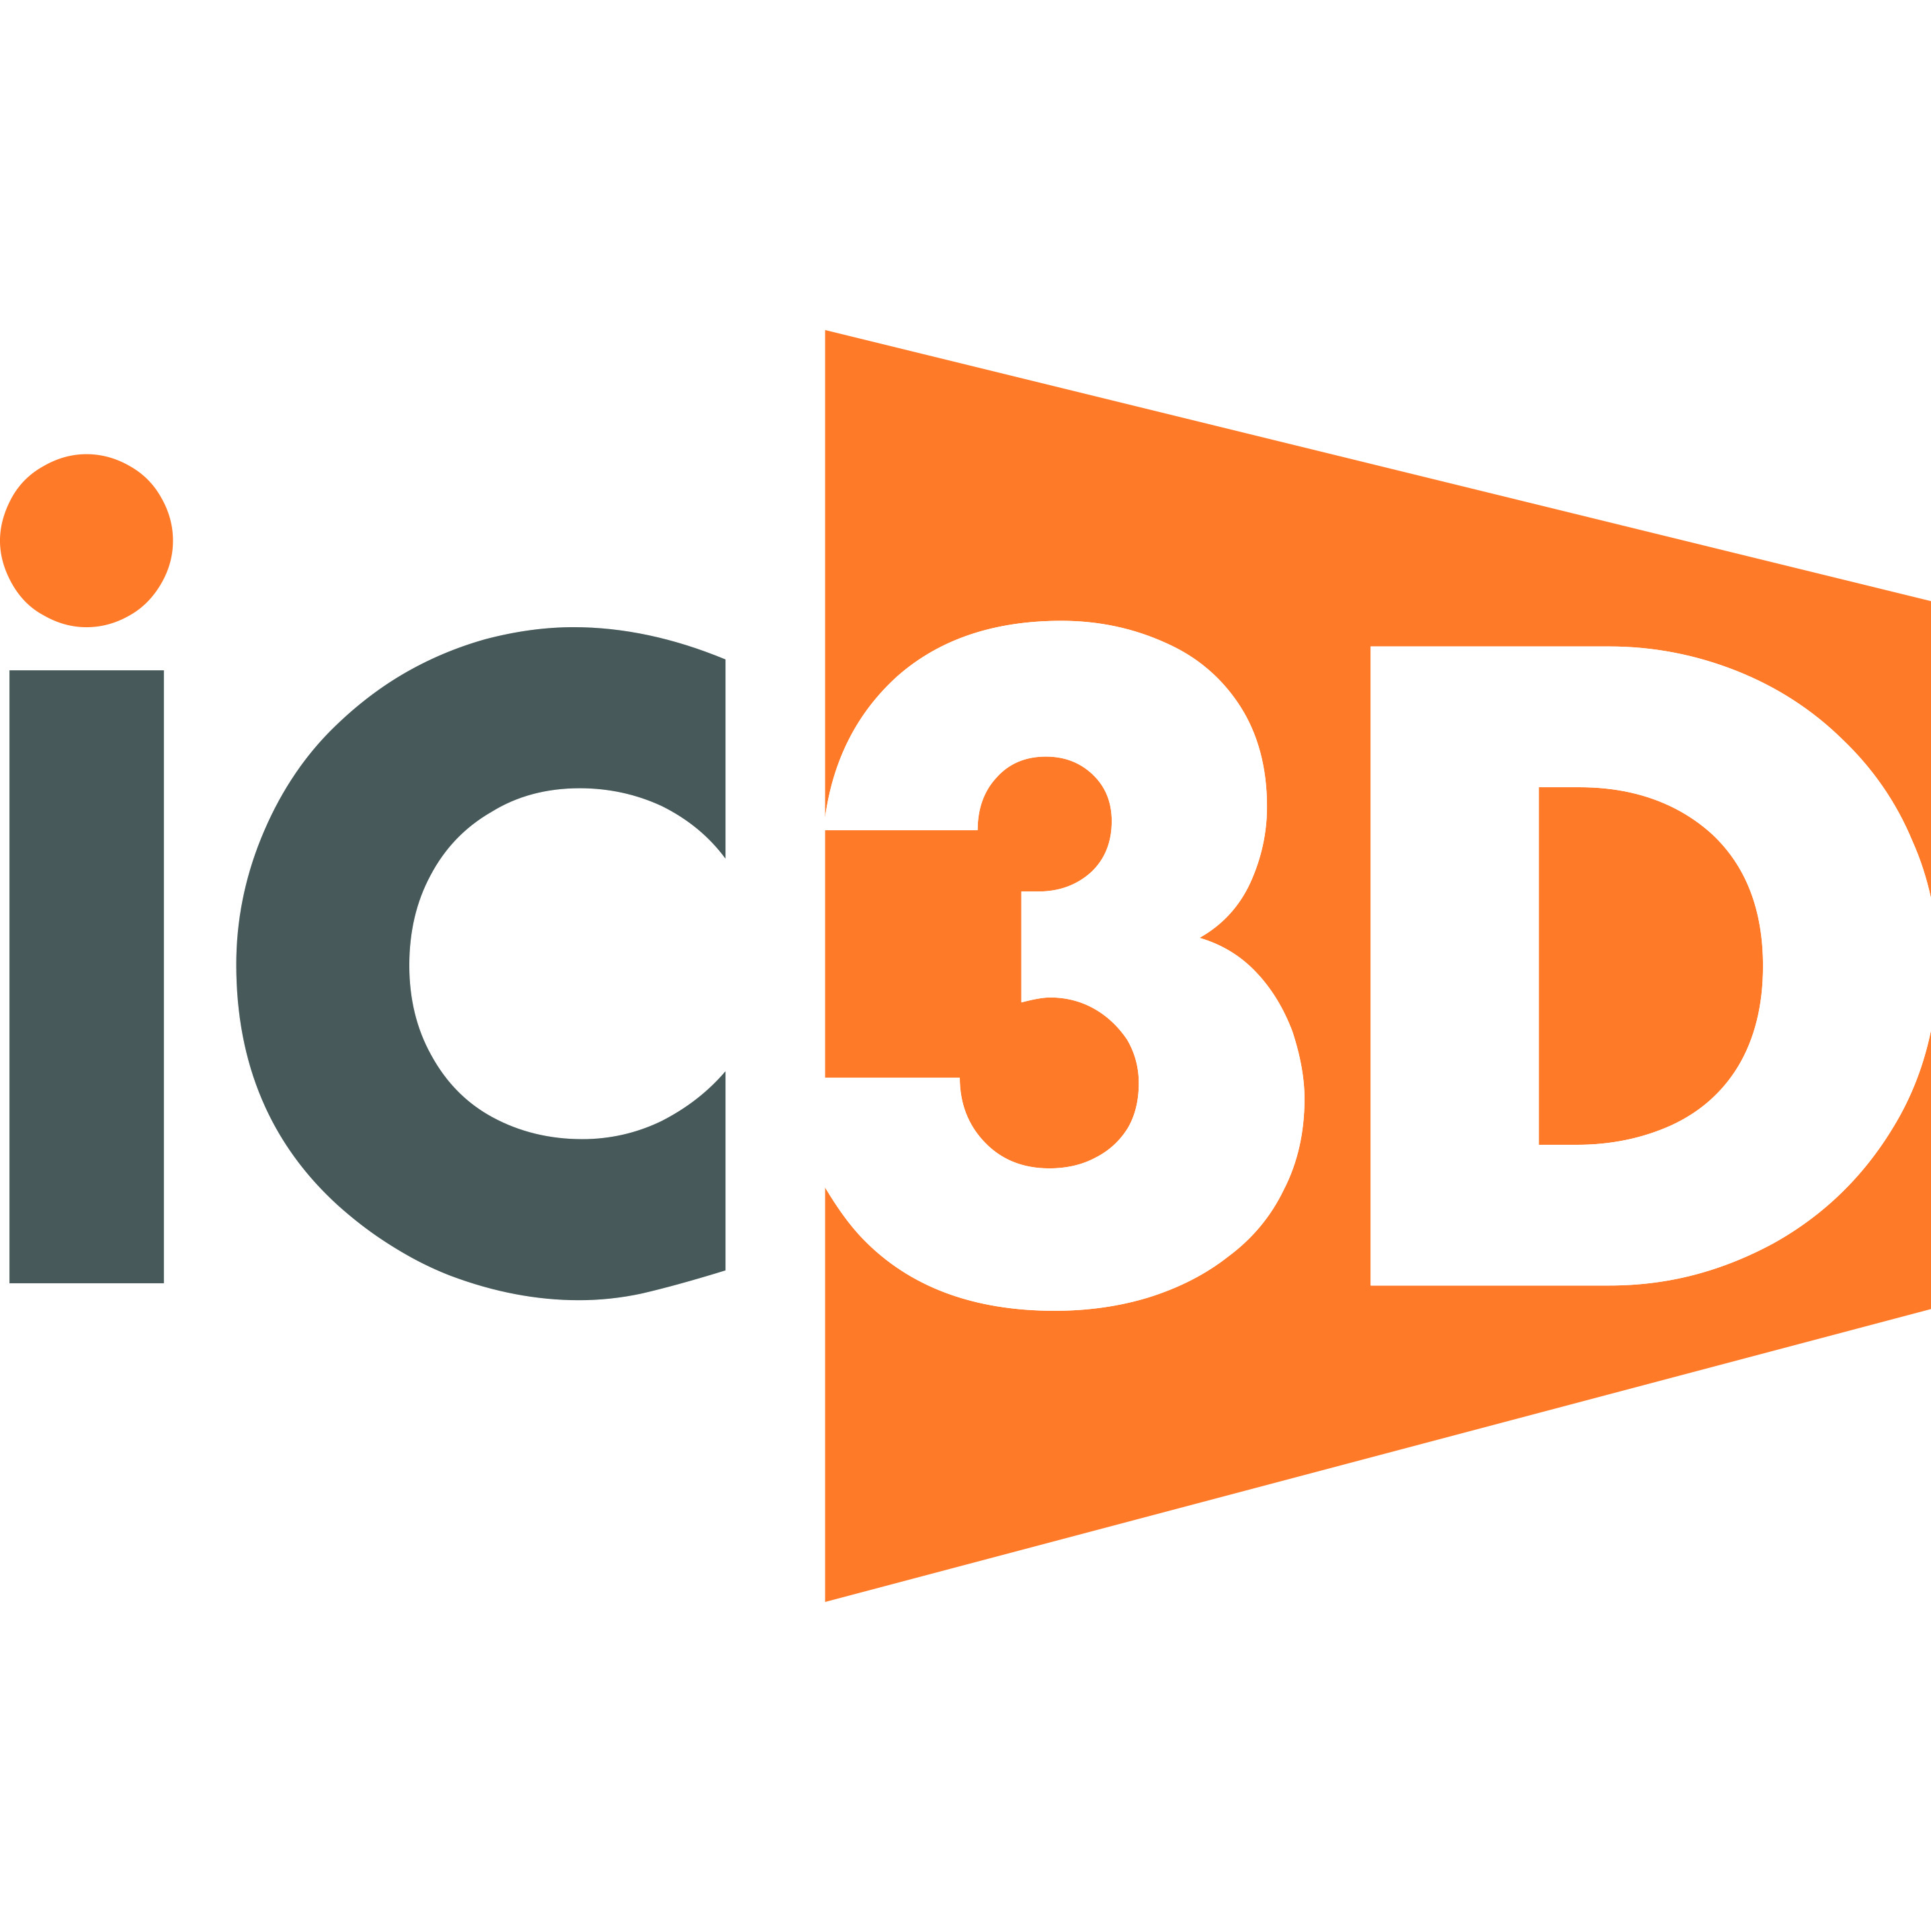 The latest iC3D version 5.5 introduces major new features visualised through real-time ray tracing